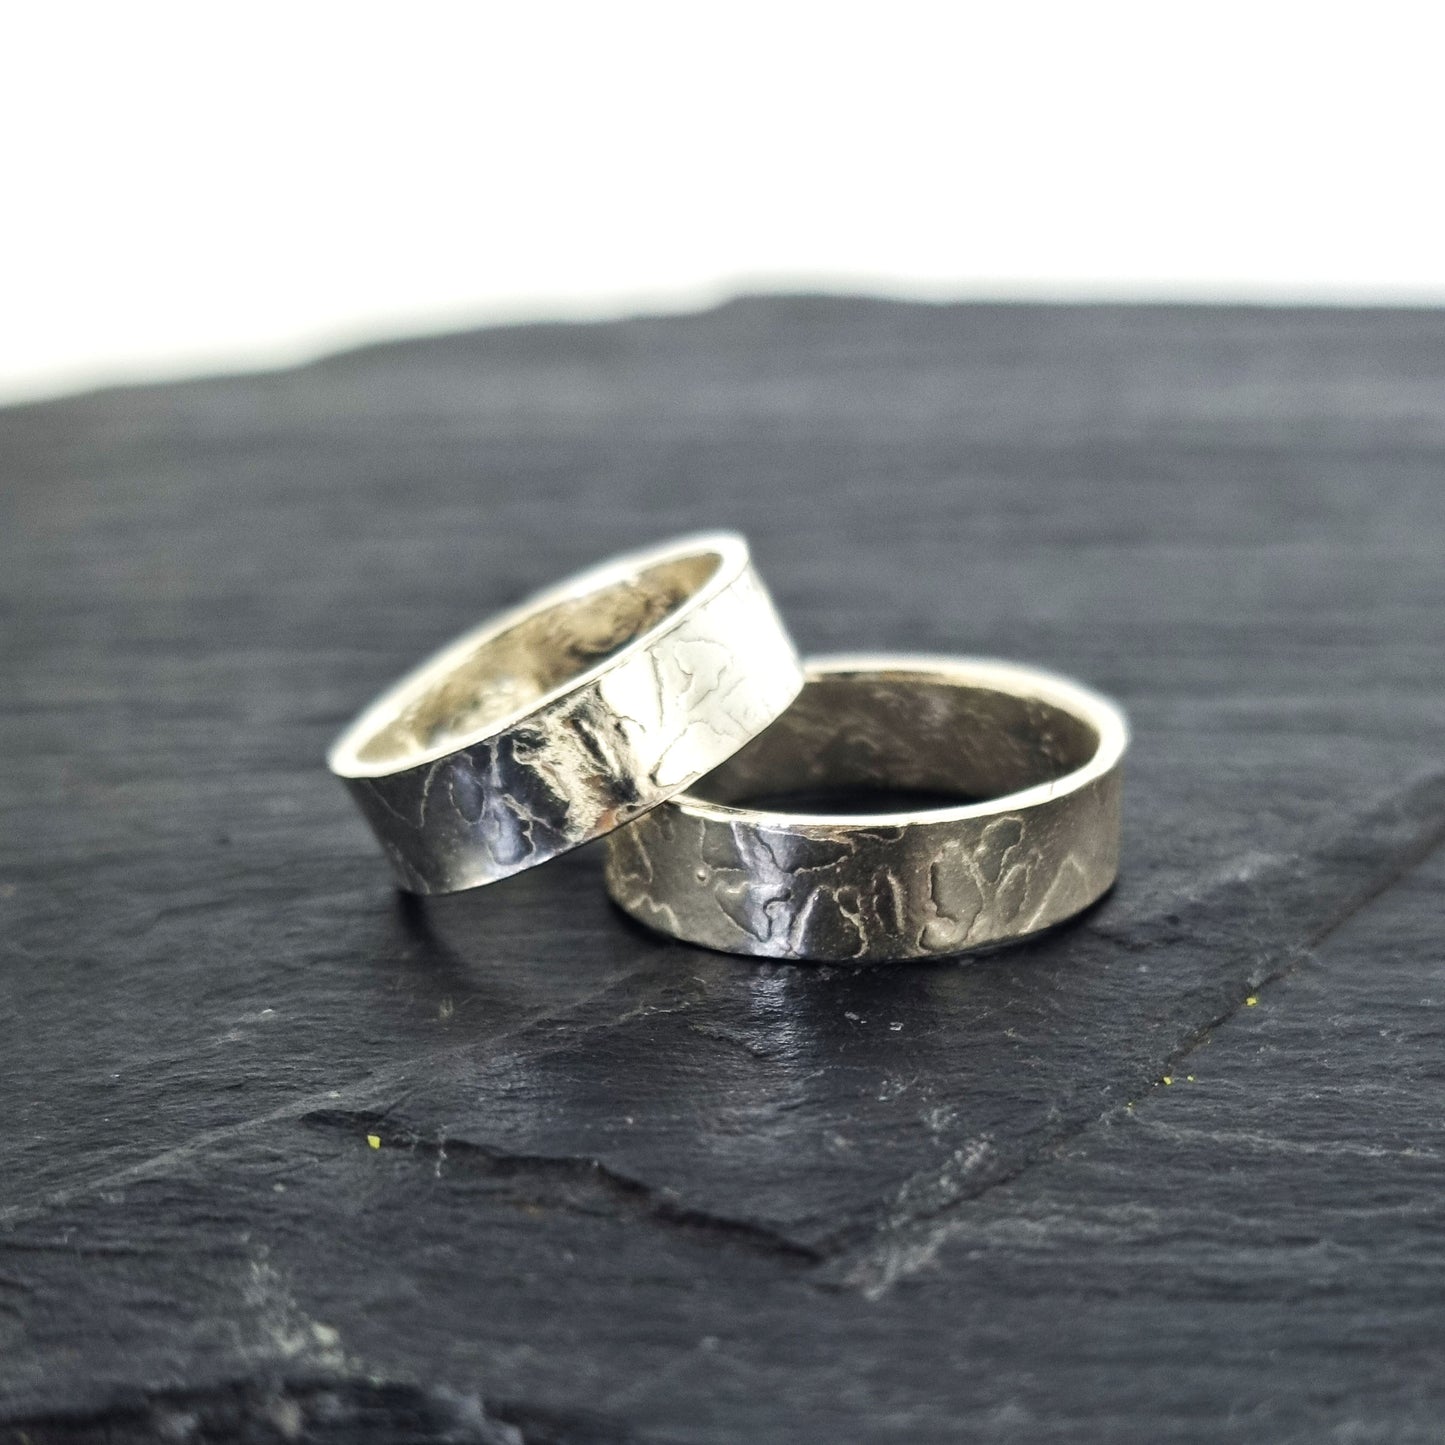 Two silver band rings with islands in the sea style pattern. His and hers.